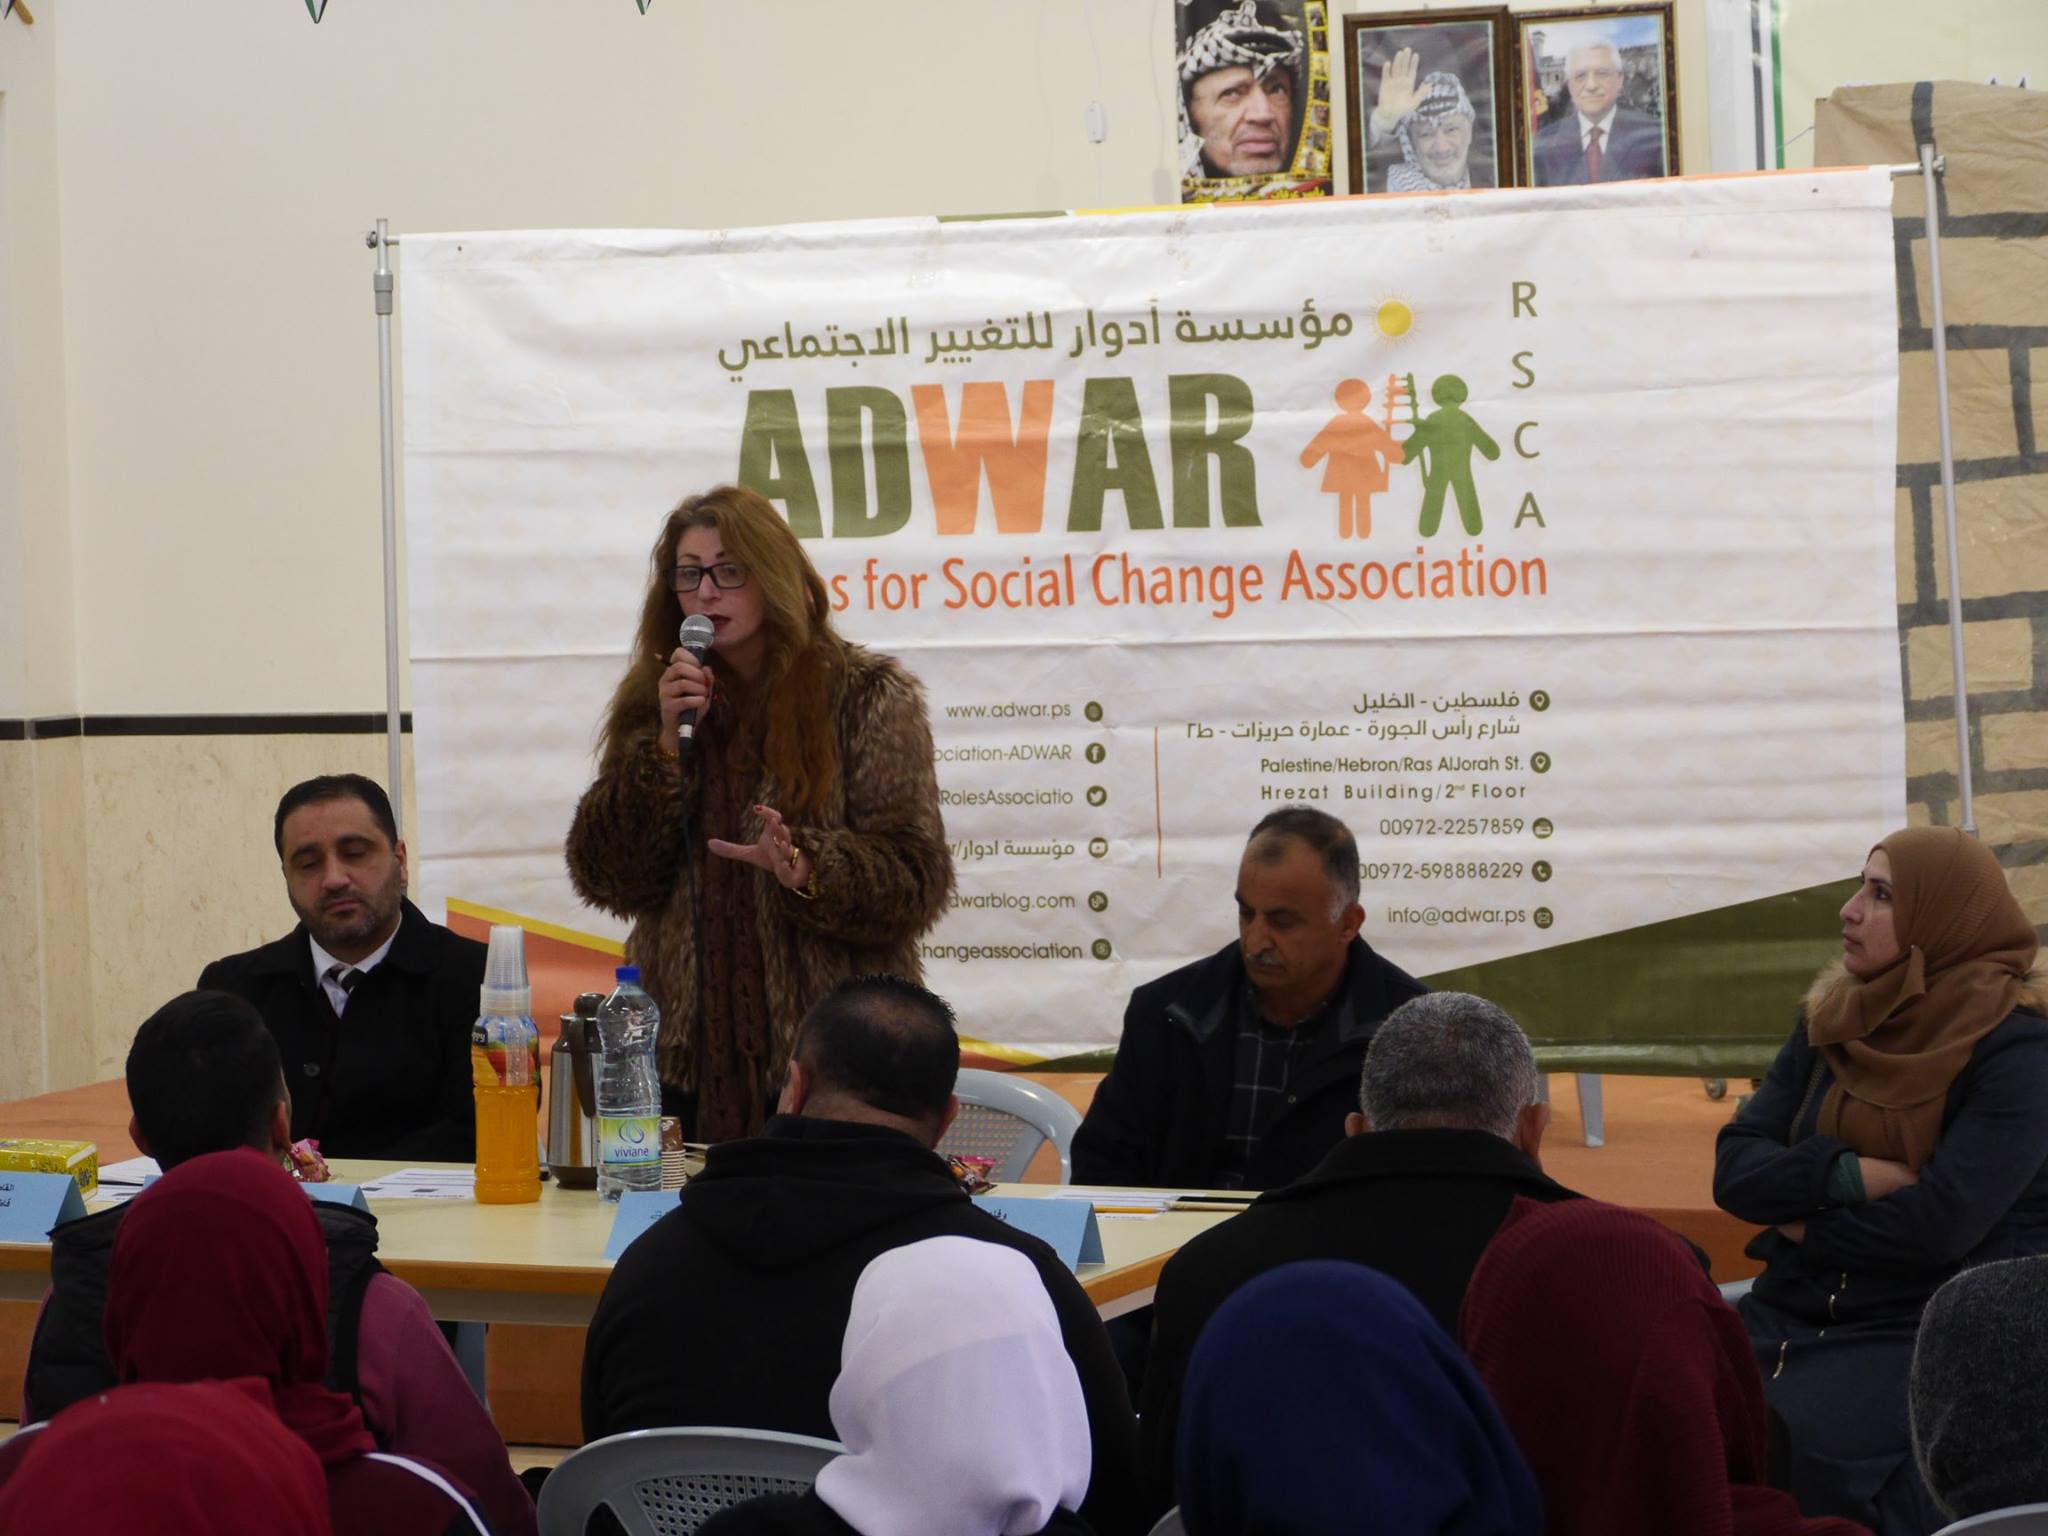  ADWAR continues implementing its theater performances in Kharas Municipality Hole